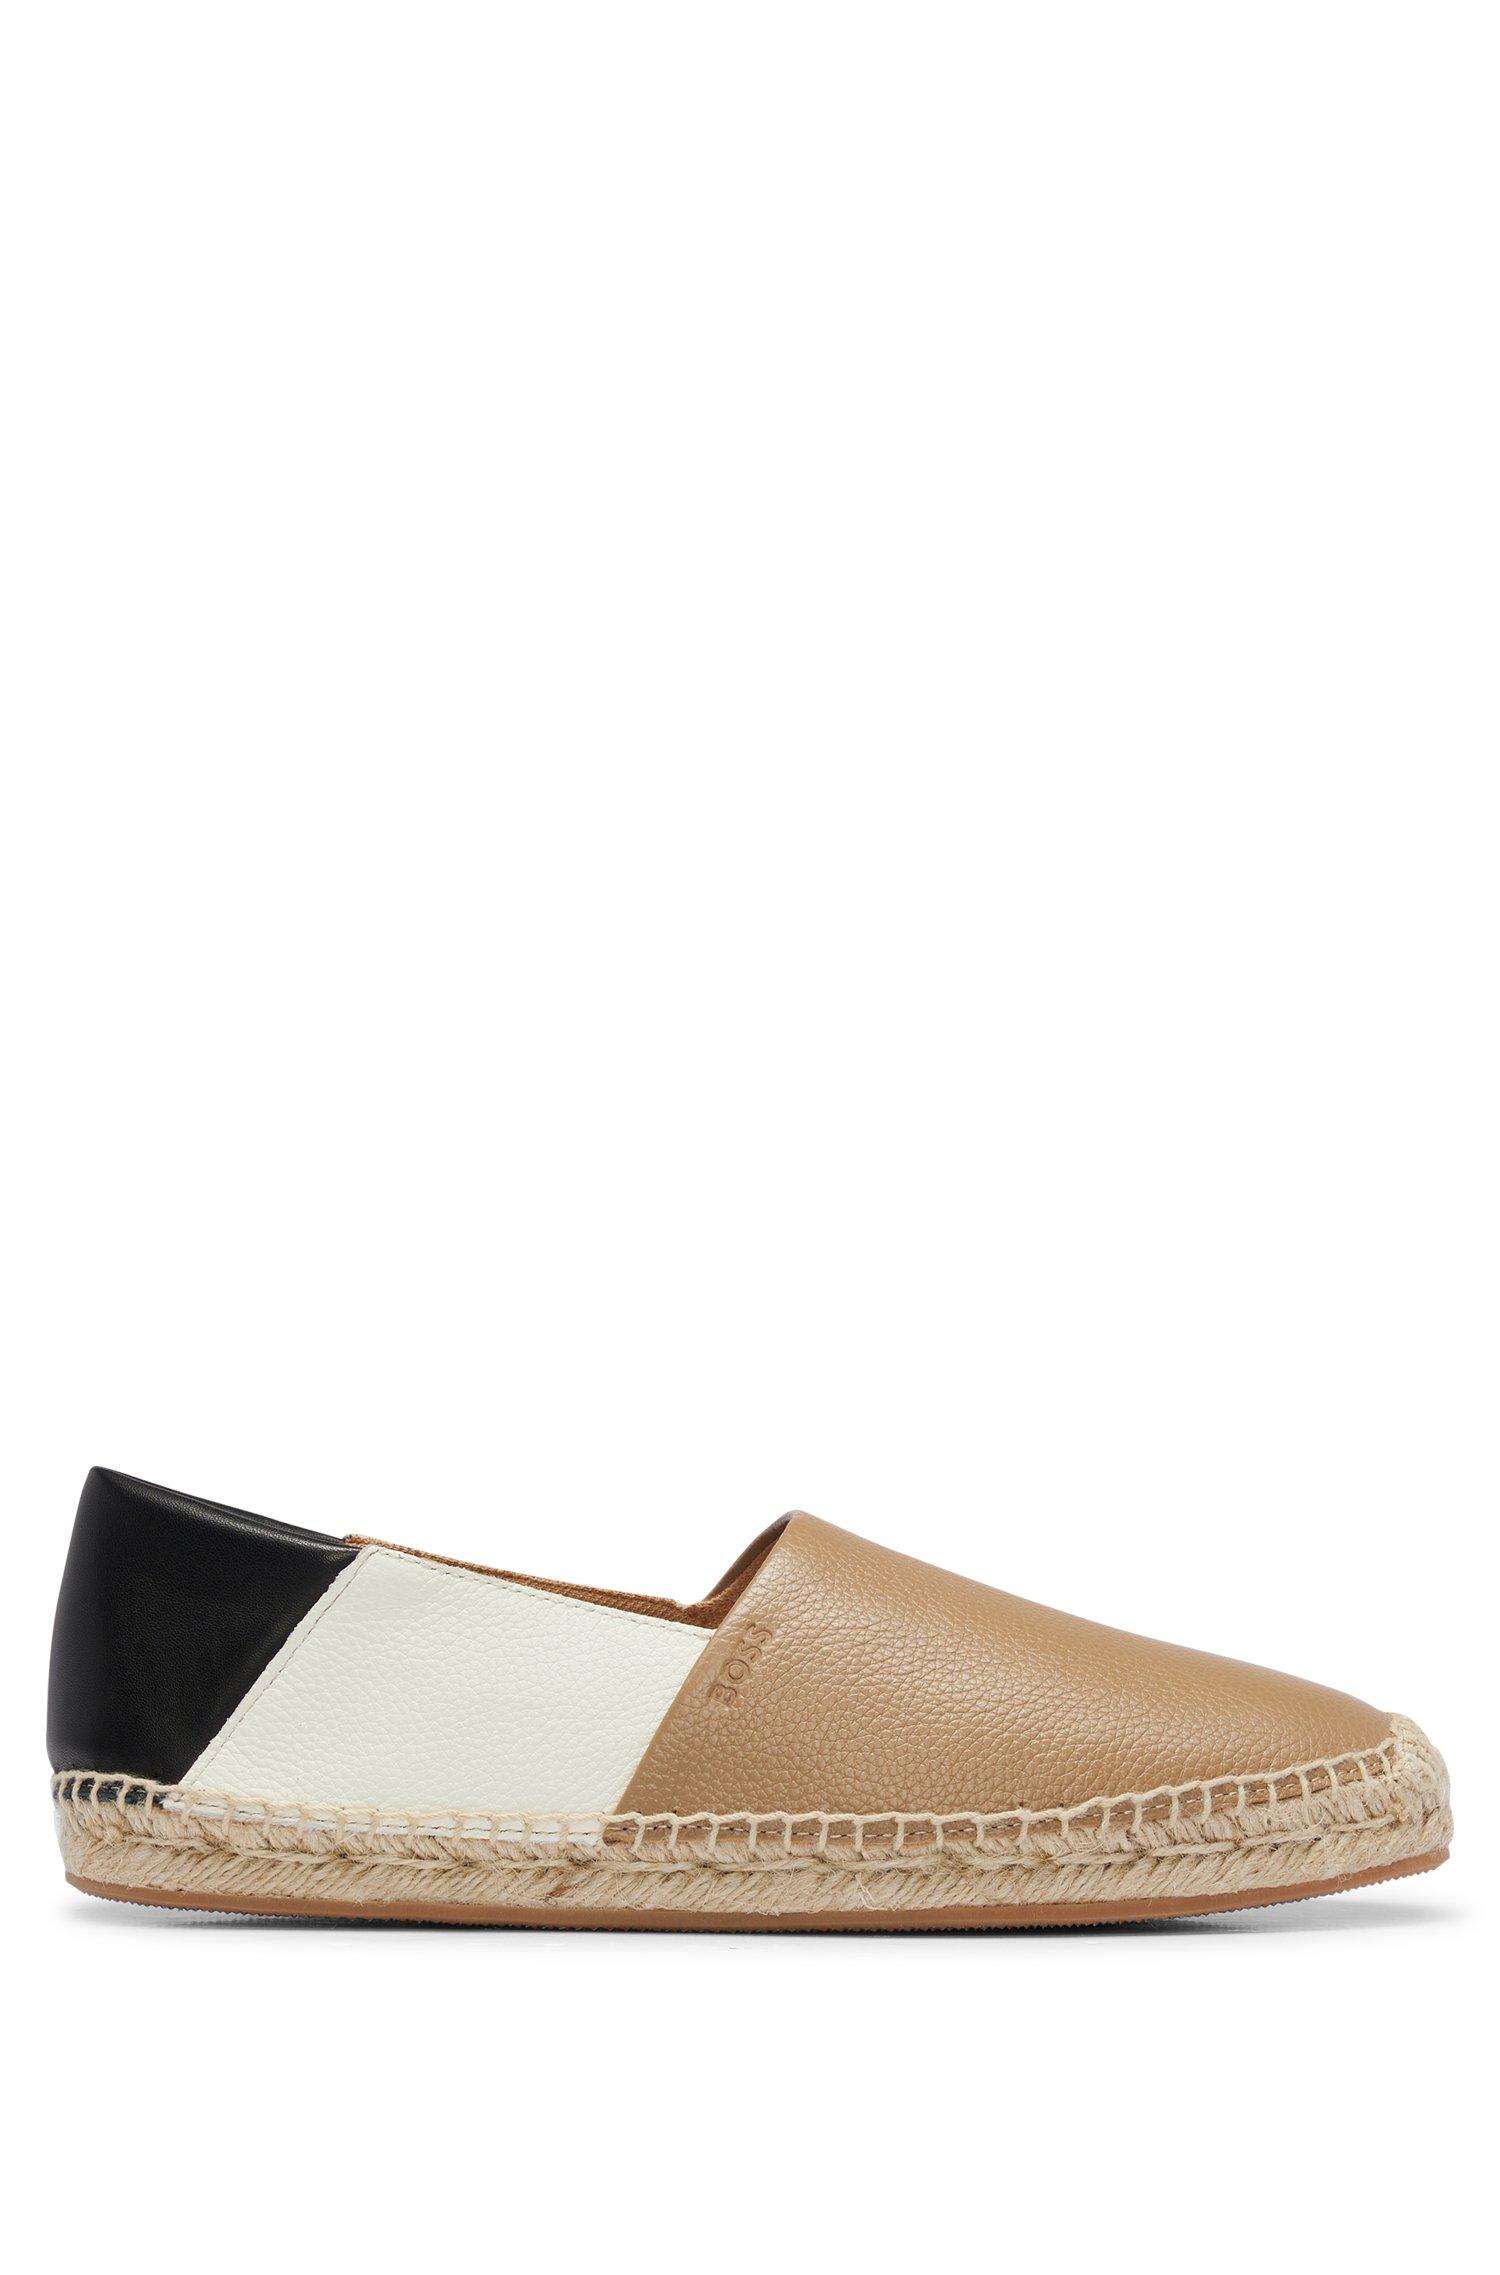 BOSS by HUGO BOSS Grained-leather Espadrilles With Signature-stripe ...